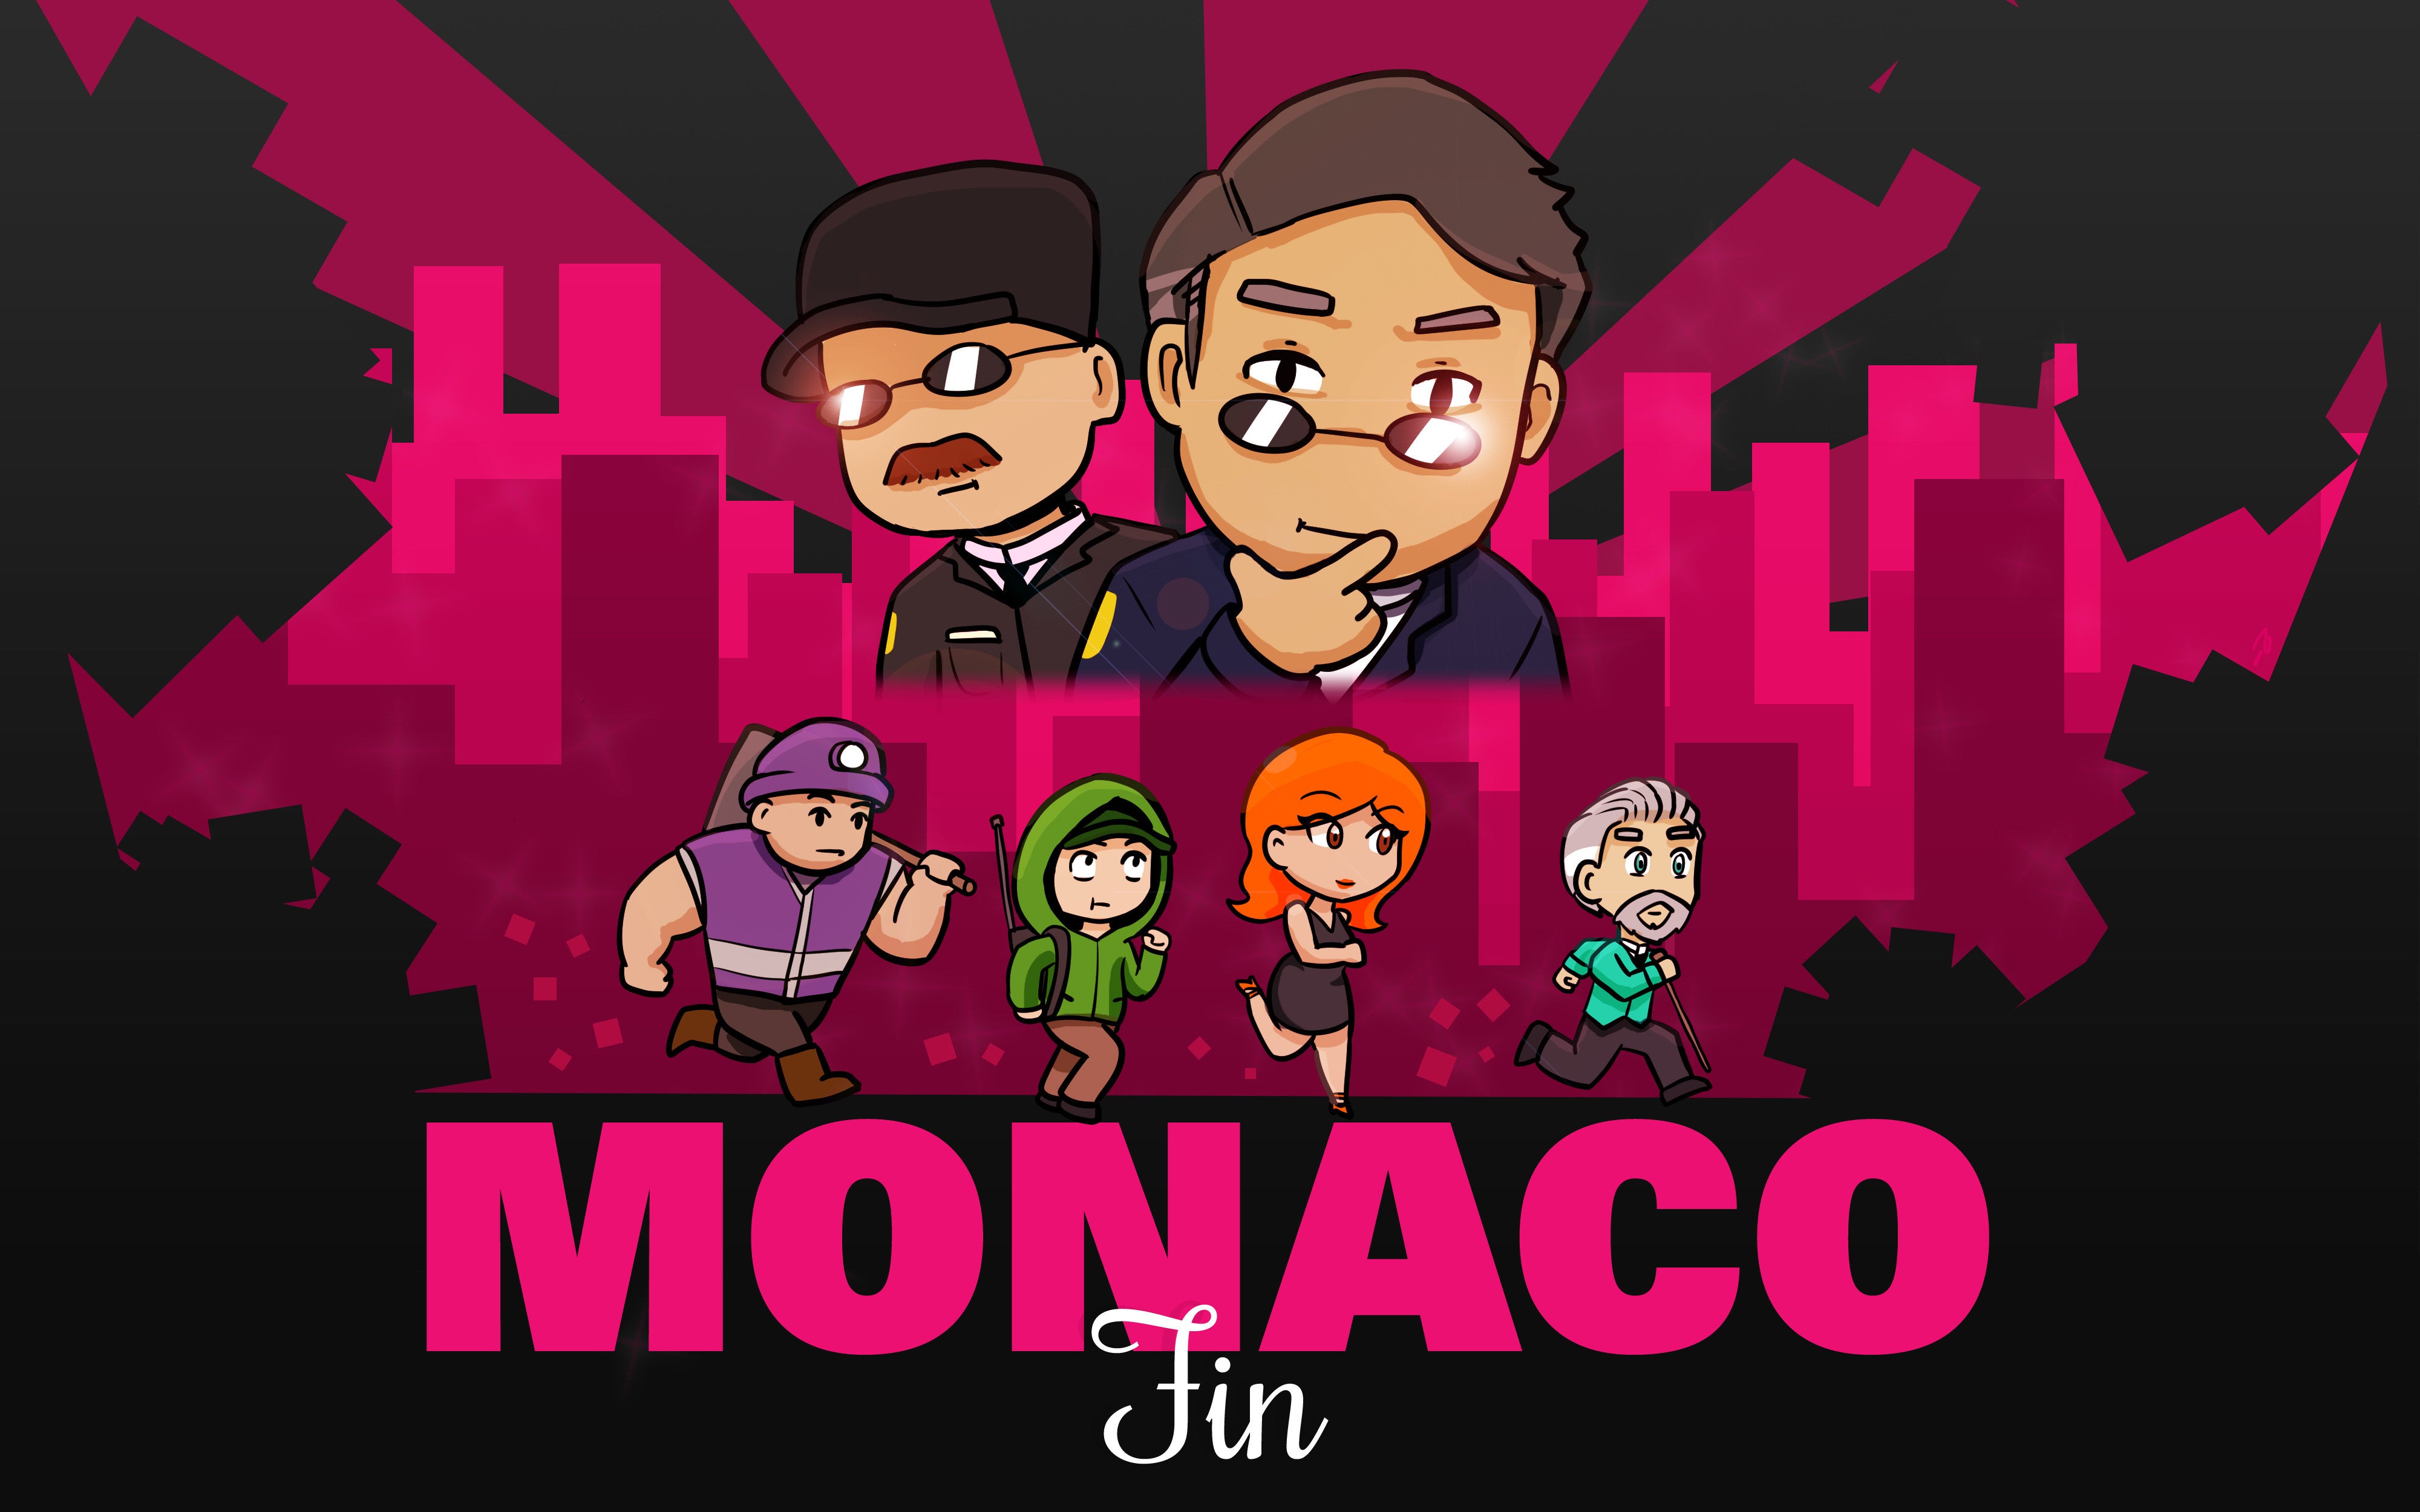 Image for Monaco: Fin is the final update to the game, on sale through Steam for 75% off